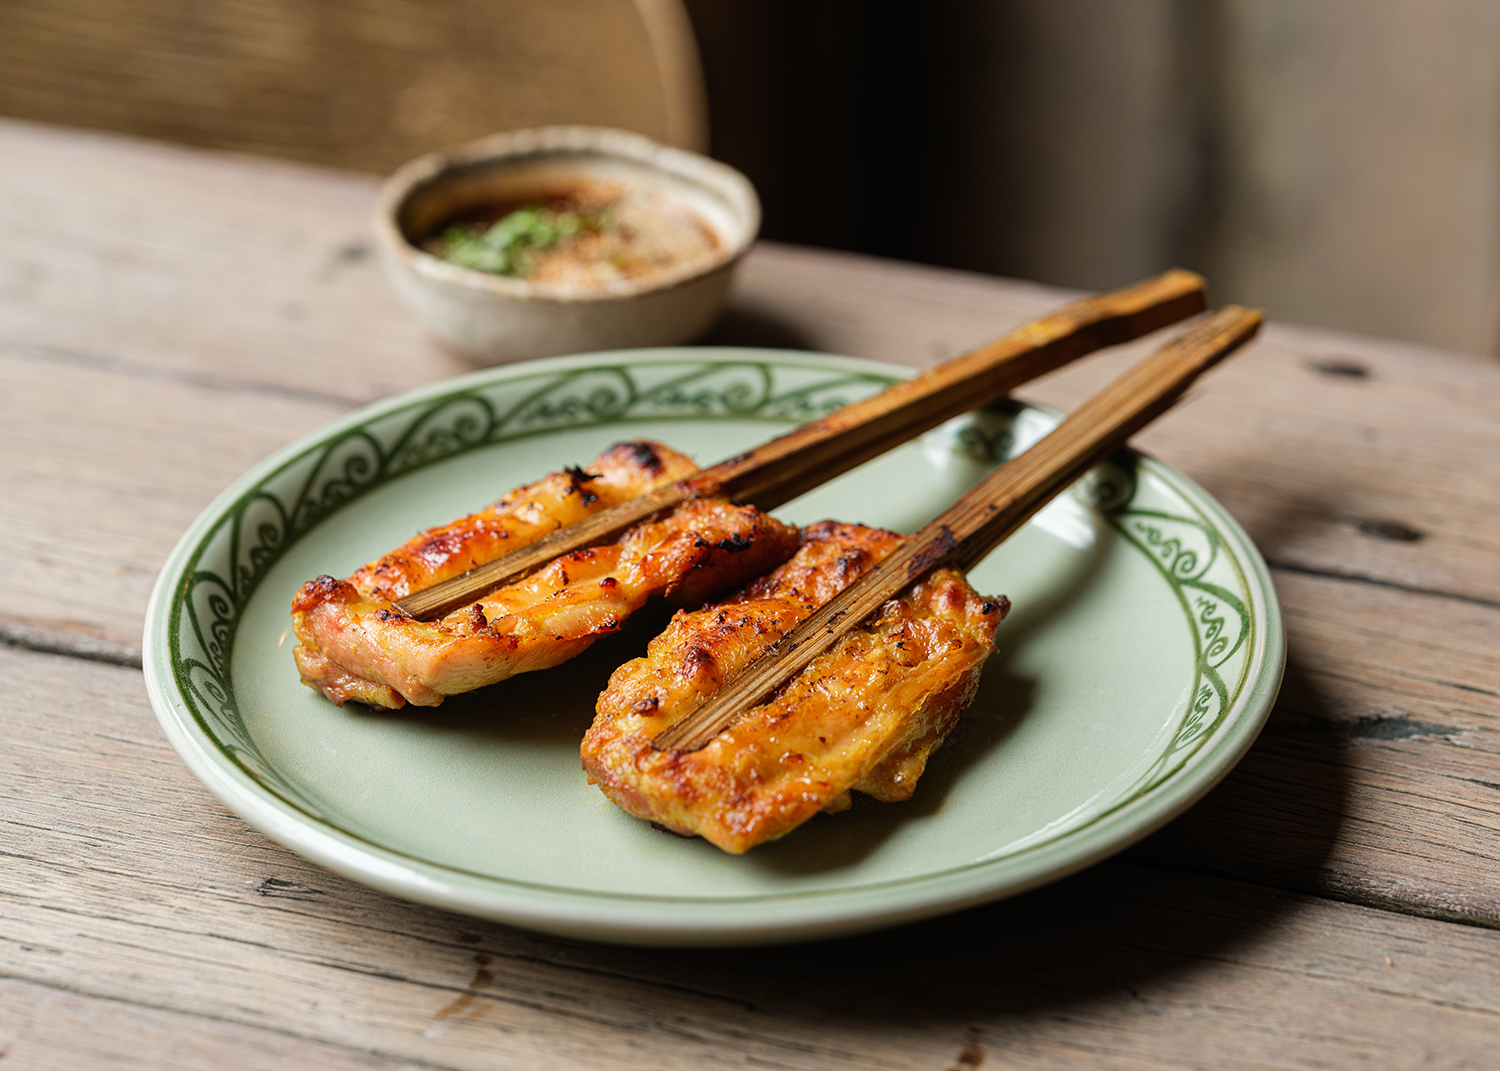 Southern Thai-style grilled chicken from Kolae